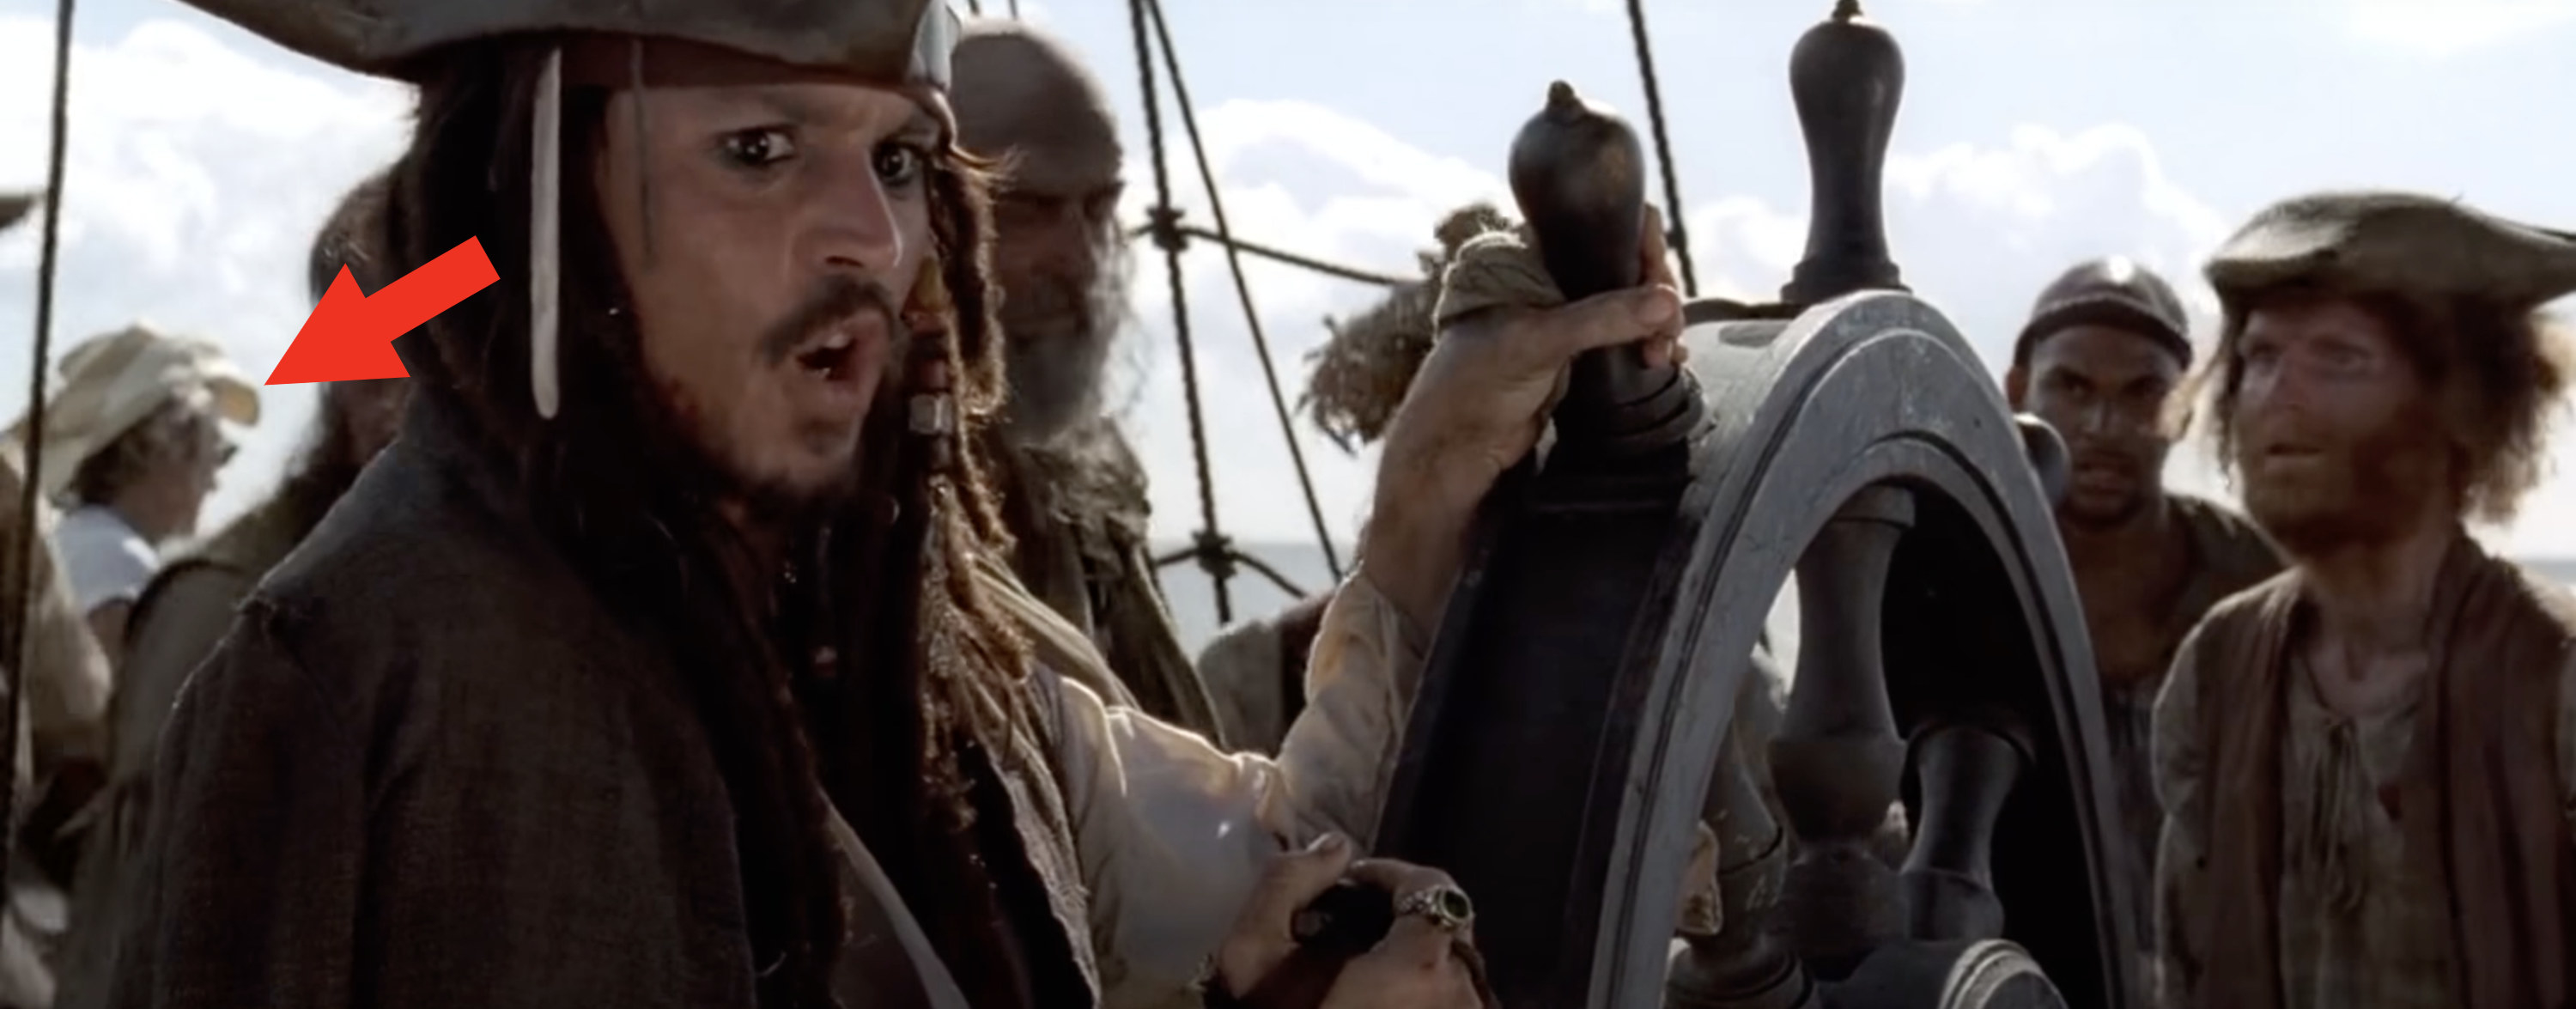 A man with a straw hat stands on deck with Jack Sparrow and his crew